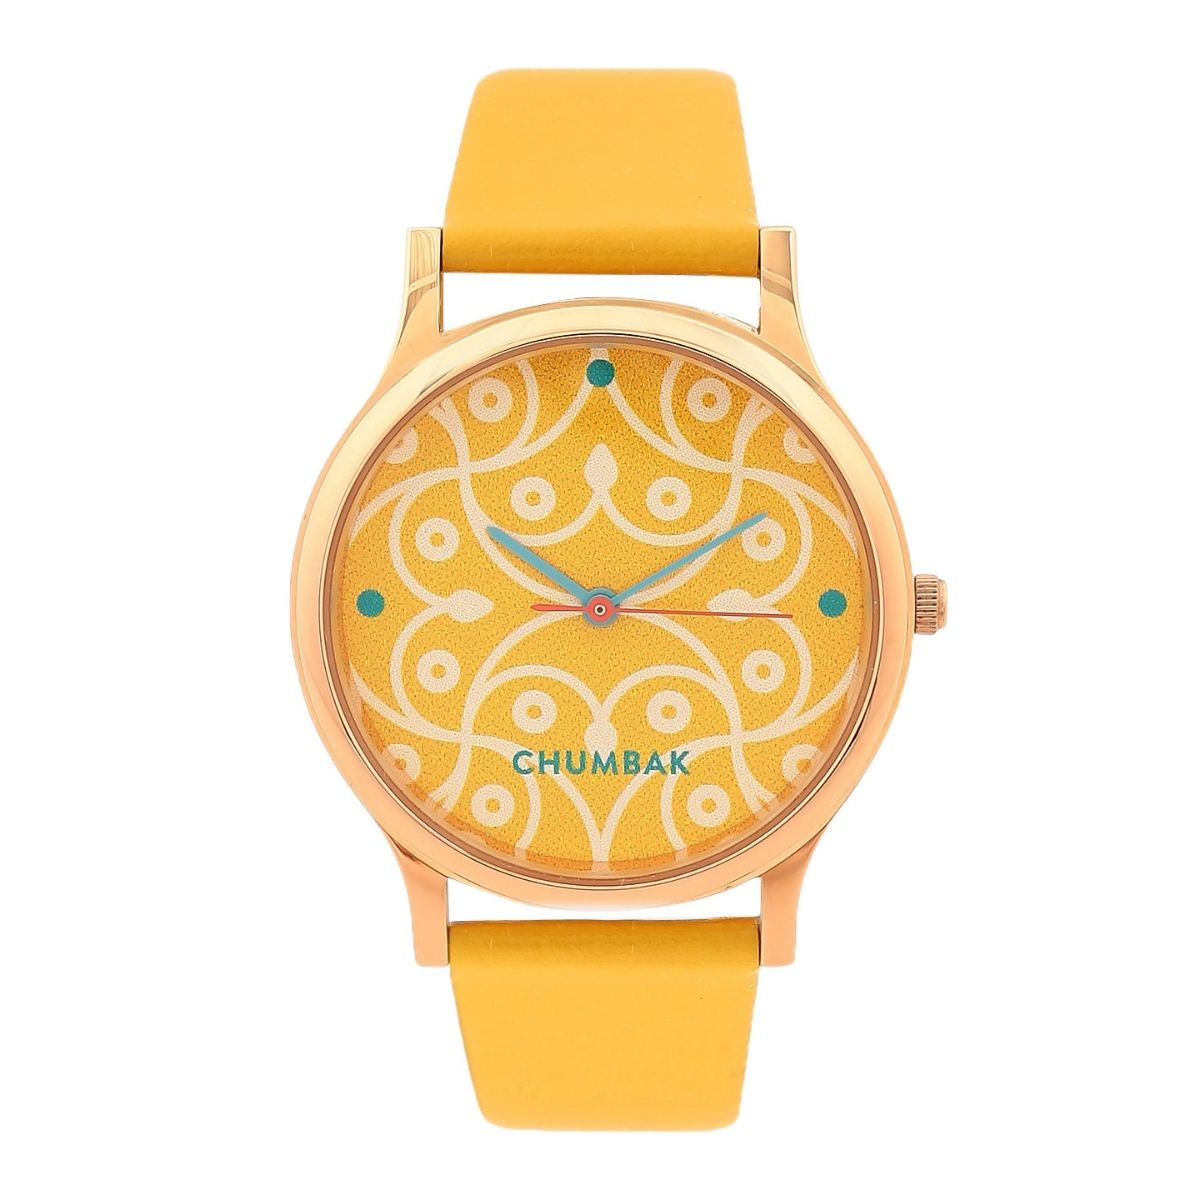 Chumbak Flora Garden Black Wrist Watch with Bracelet Buy Chumbak Flora  Garden Black Wrist Watch with Bracelet Online at Best Price in India  Nykaa